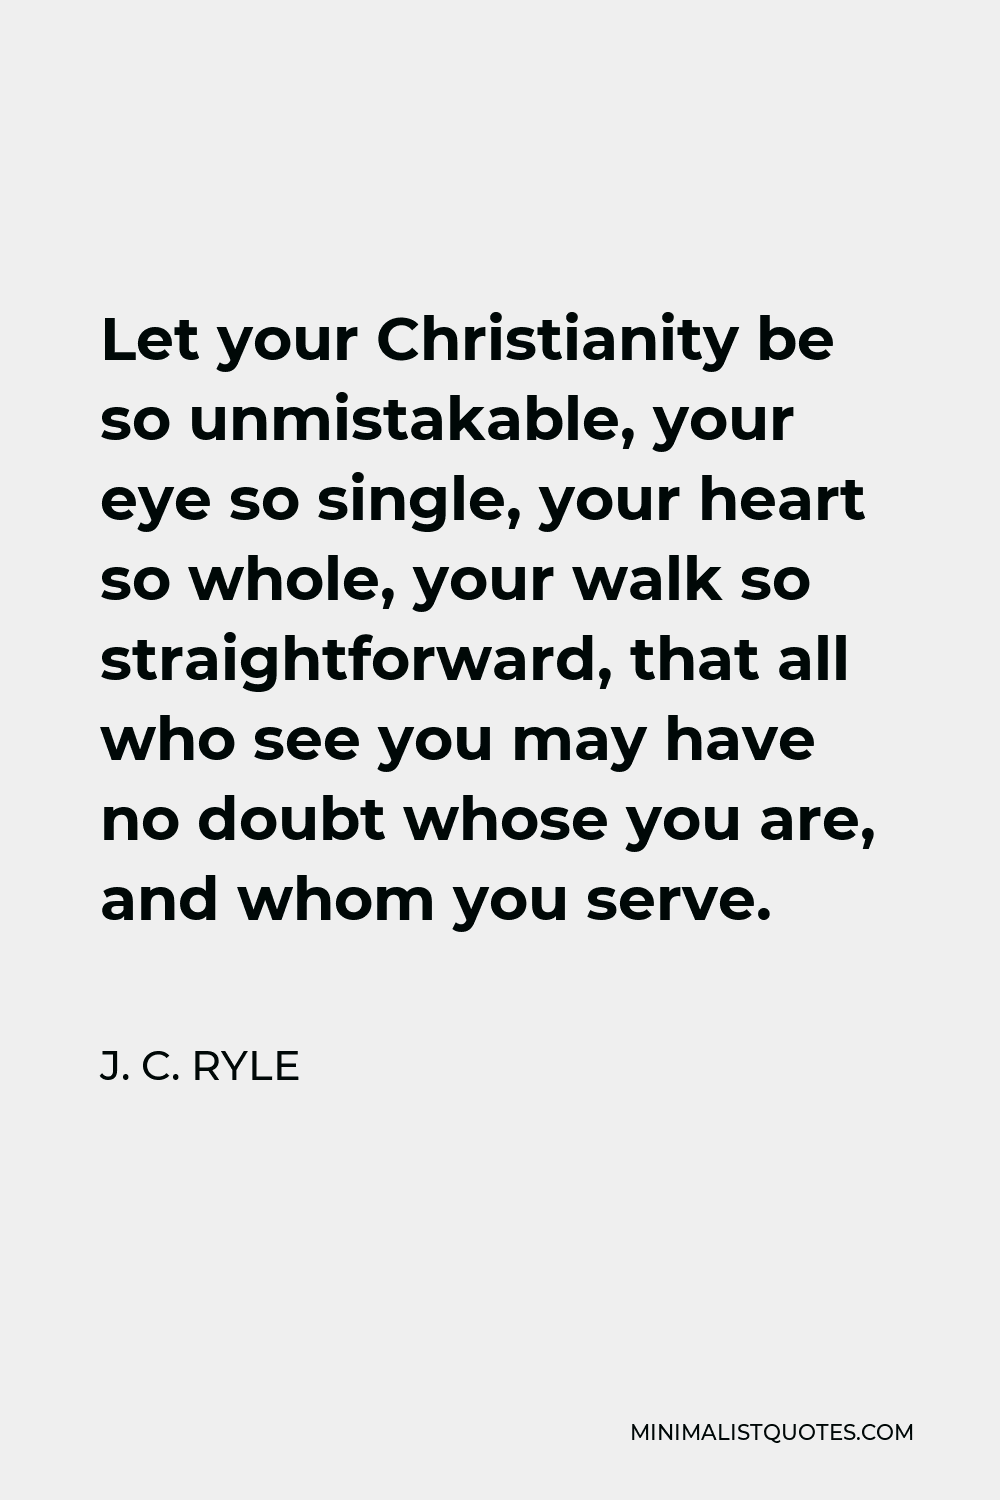 J. C. Ryle Quote - Let your Christianity be so unmistakable, your eye so single, your heart so whole, your walk so straightforward, that all who see you may have no doubt whose you are, and whom you serve.